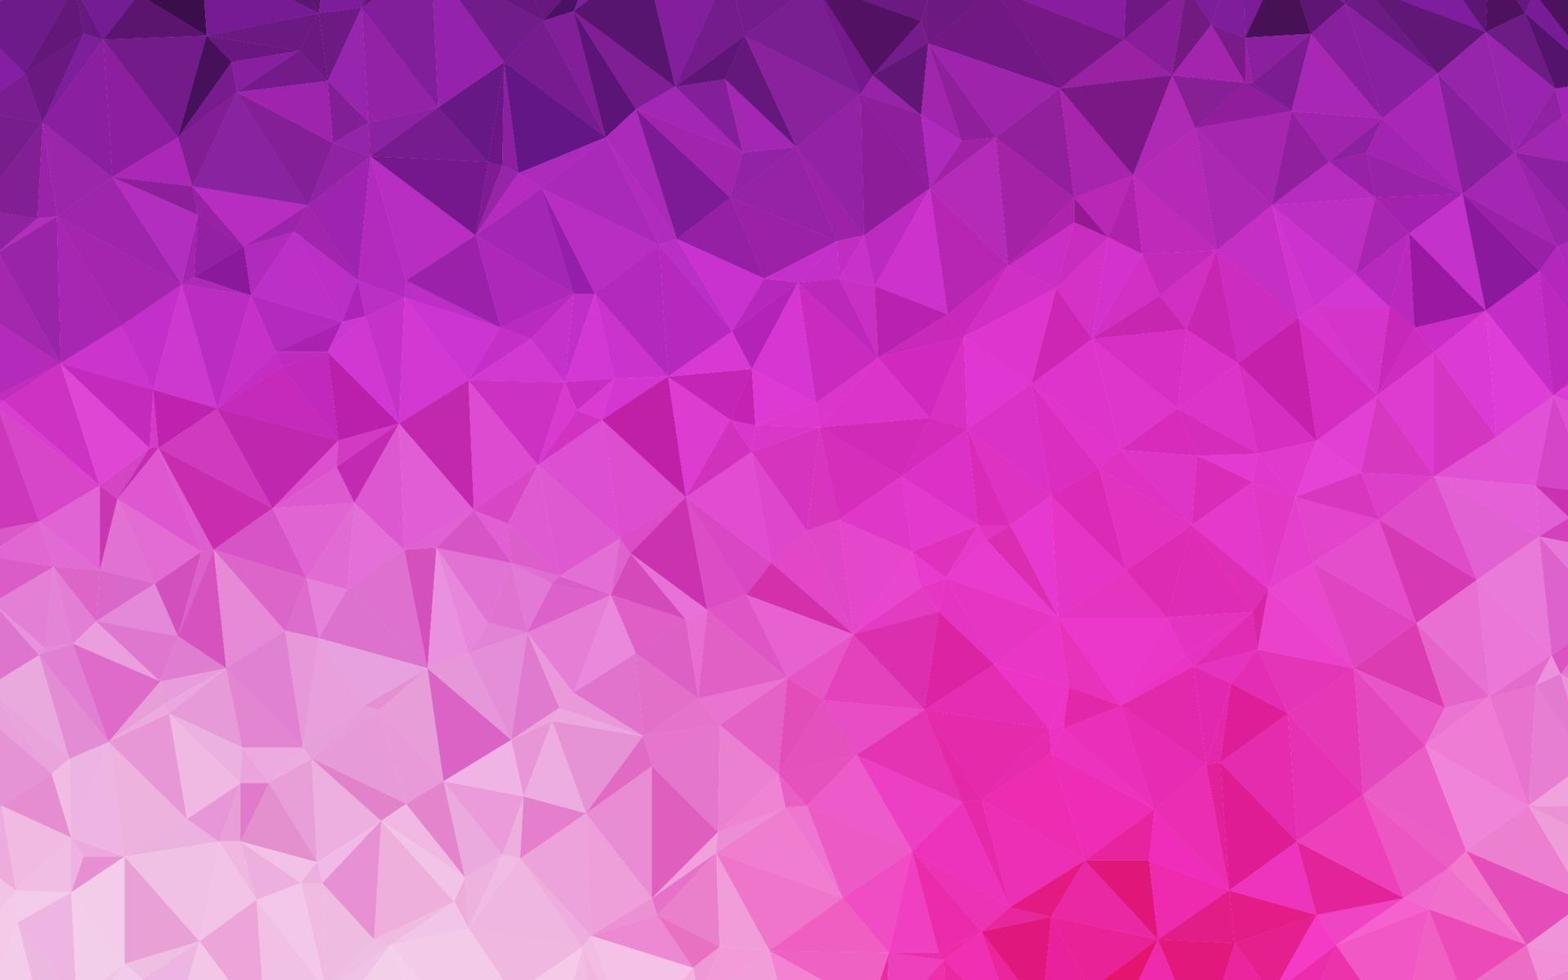 Light Pink vector polygon abstract backdrop.